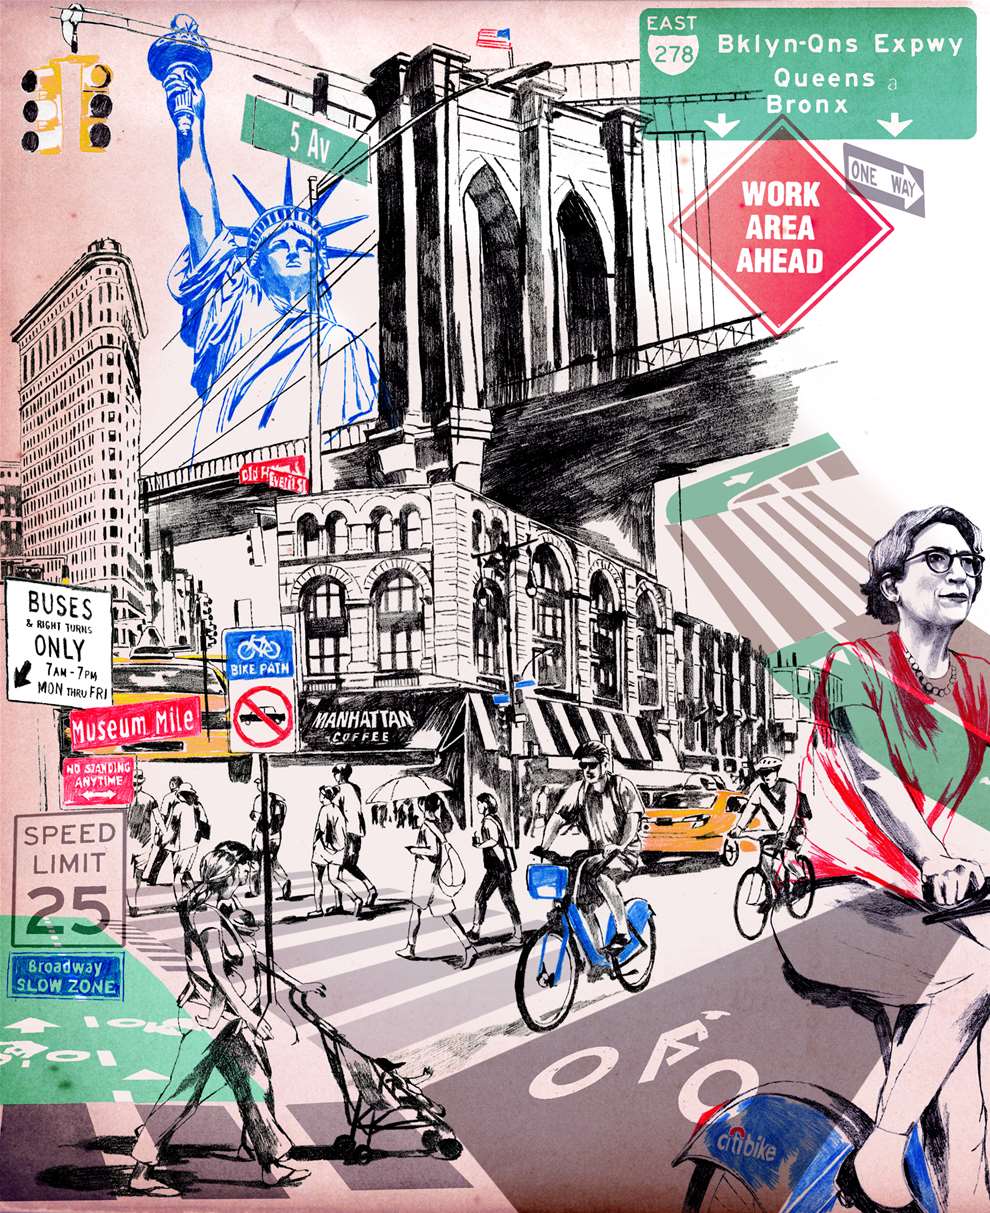 Montse Bernal, Mixed media pen and ink illustration of New York bustling city with architecture, monuments and people cycling. 